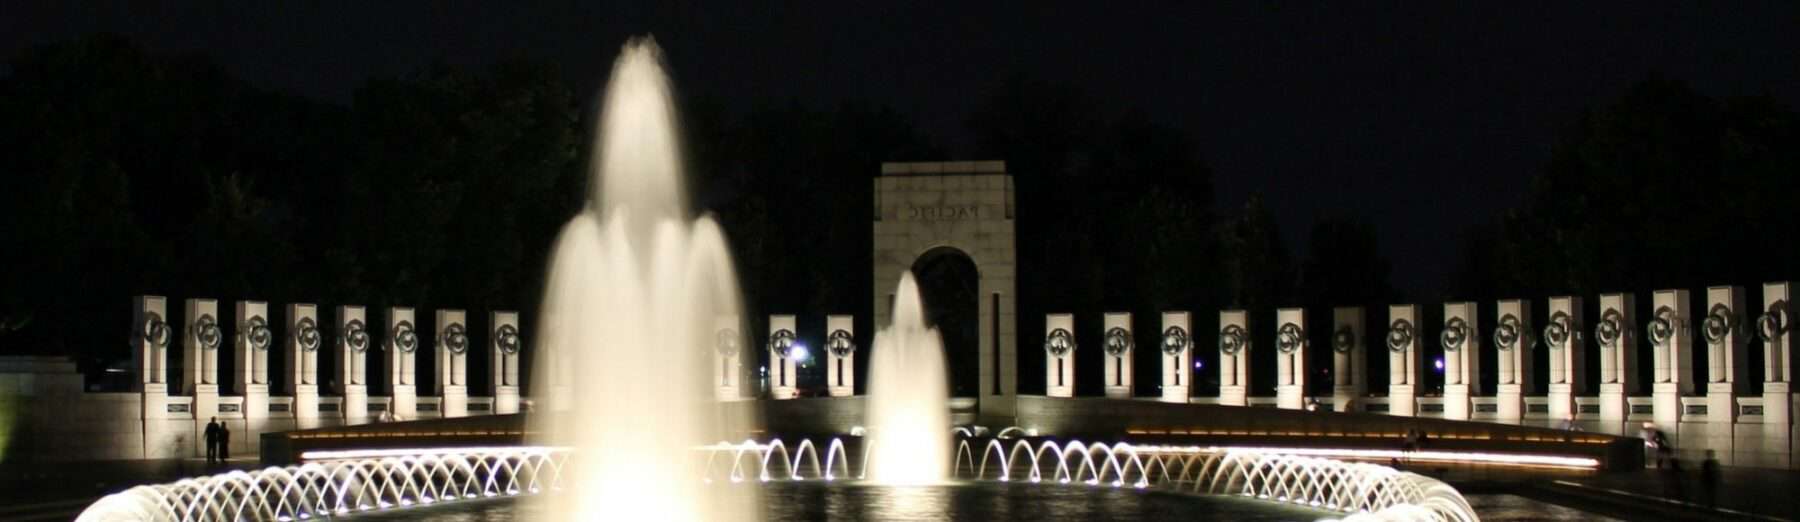 things to do in dc at night